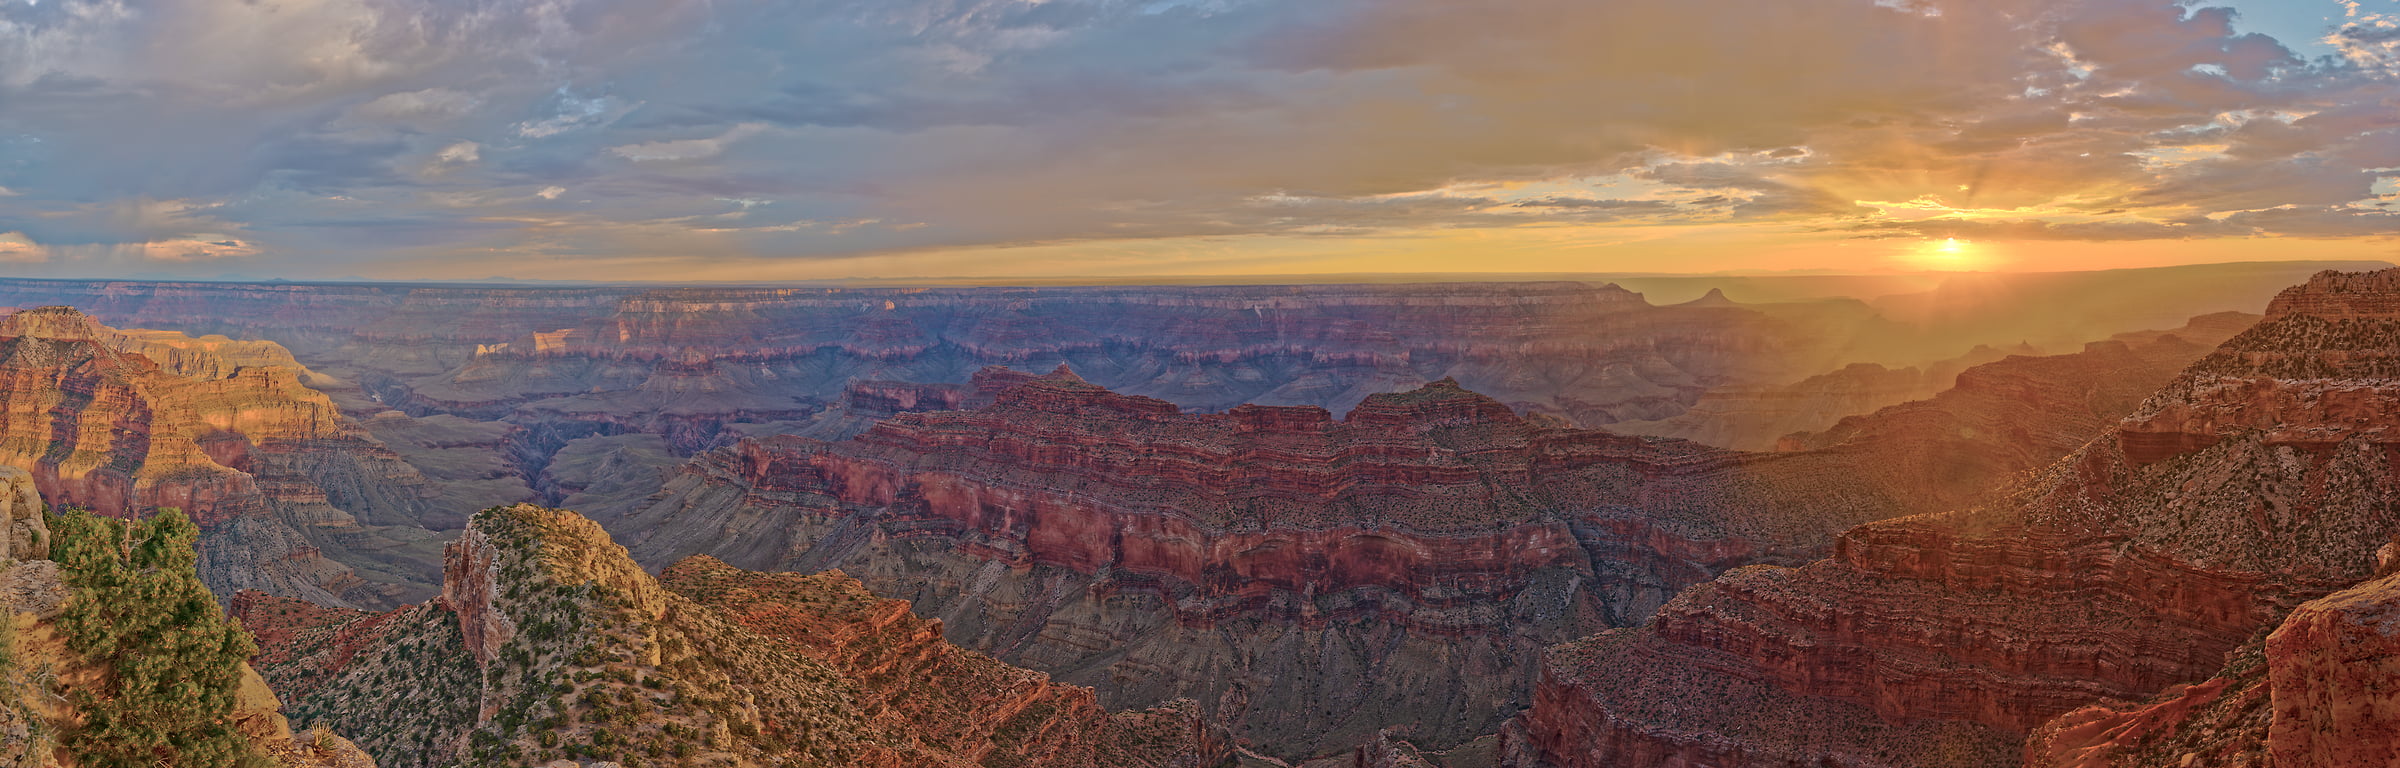 1,059 megapixels! A very high resolution, large-format VAST photo print of the Grand Canyon at sunset; landscape photograph created by John Freeman in Point Sublime, North Rim, Grand Canyon National Park, Arizona.